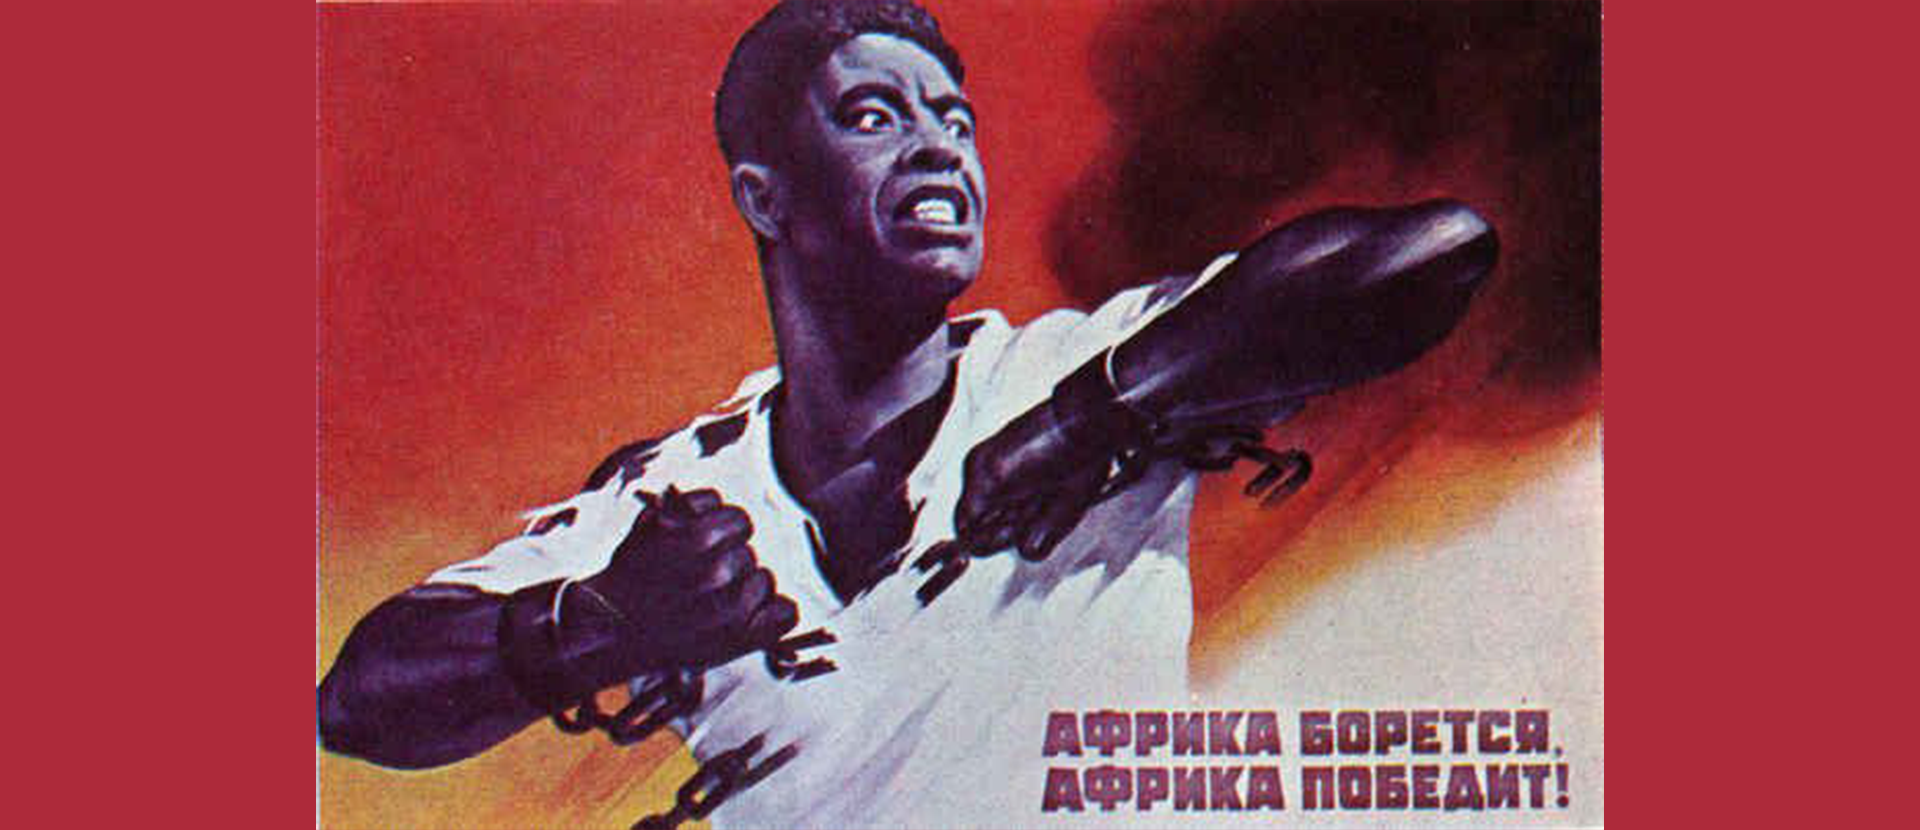 The Soviet Union and Africa Economic Header Image